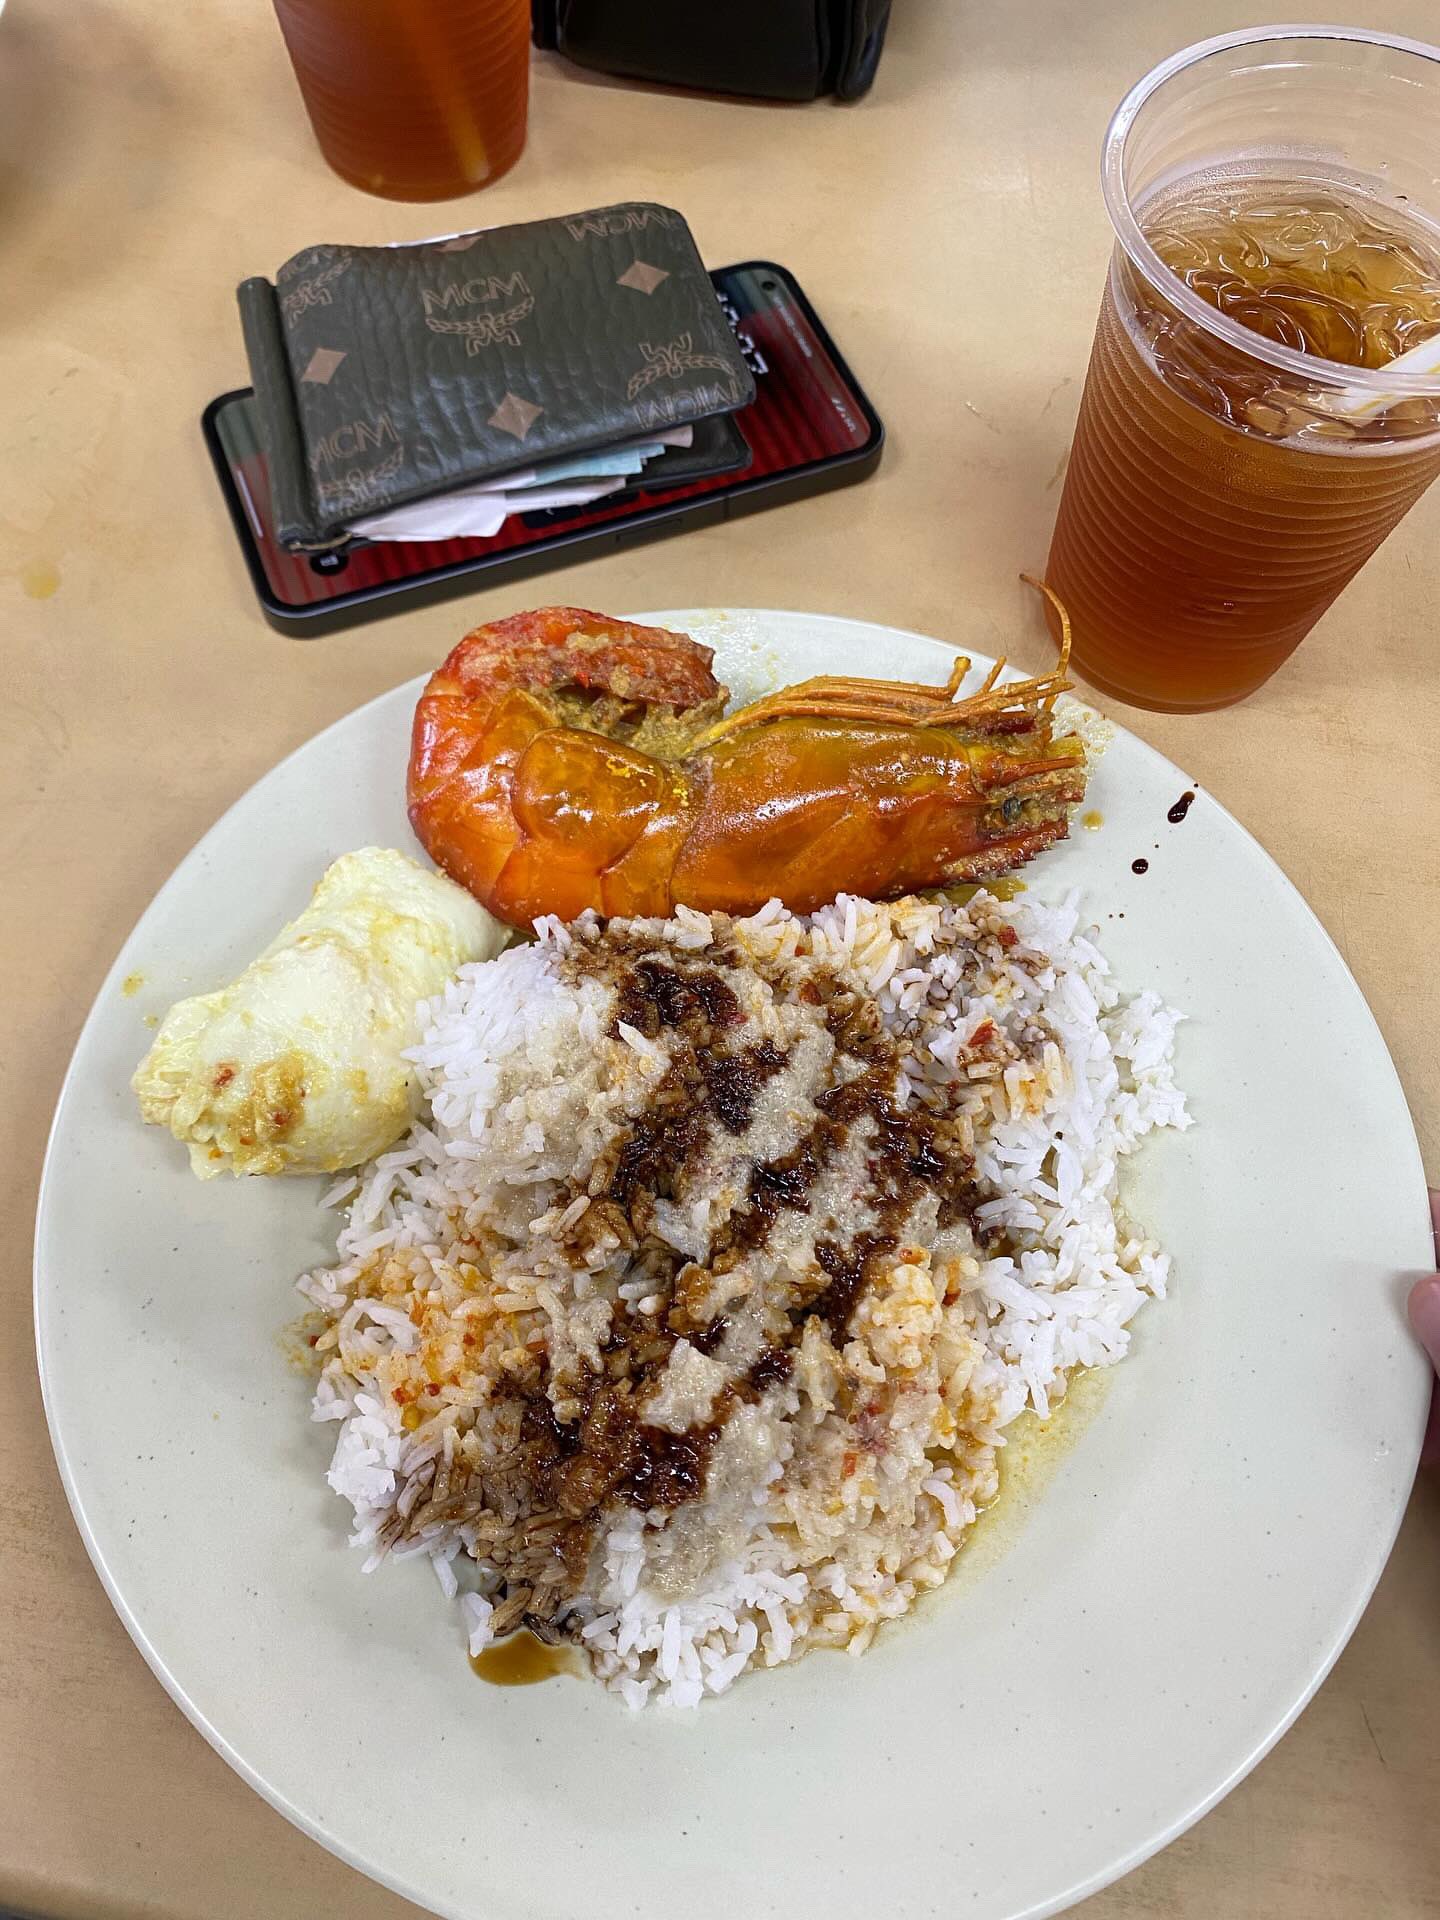 M'sian netizen's meal of rm30 tiger prawn, egg, and rice